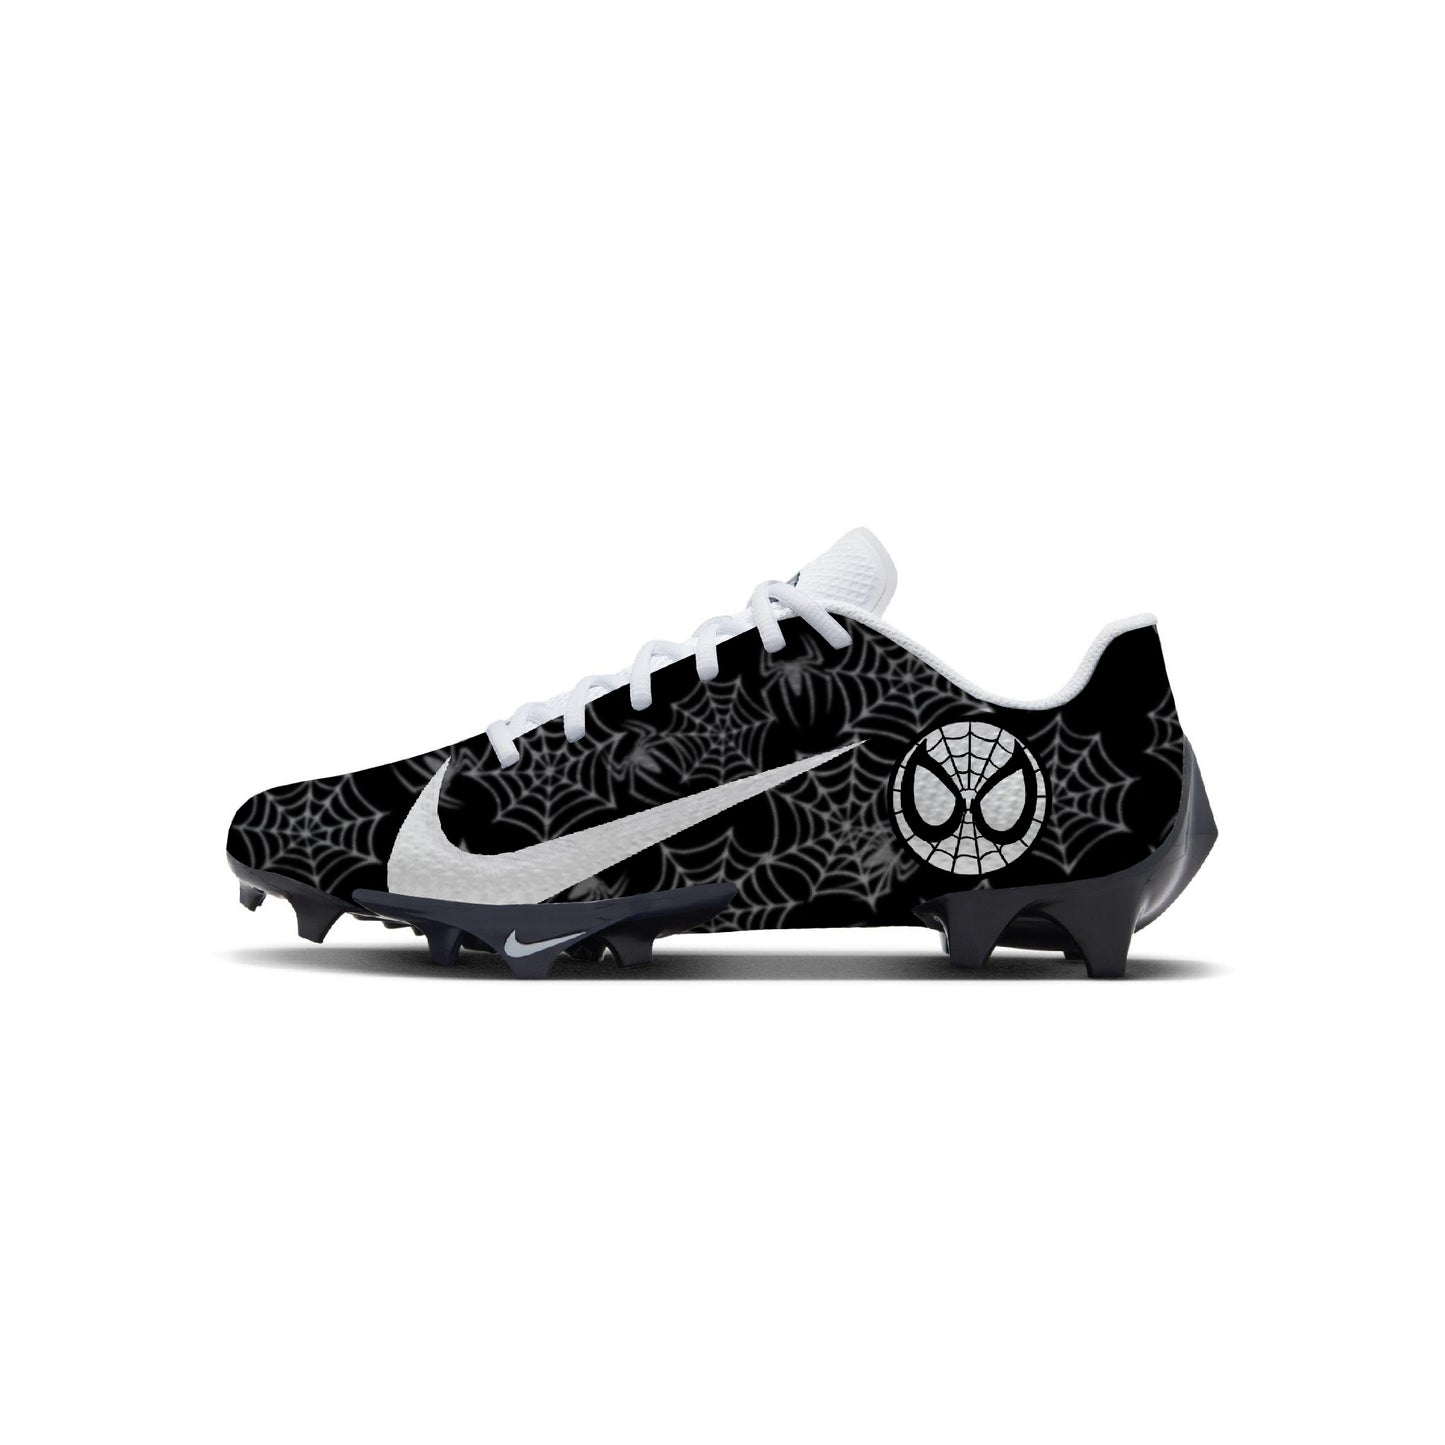 “Spider” Football Cleats